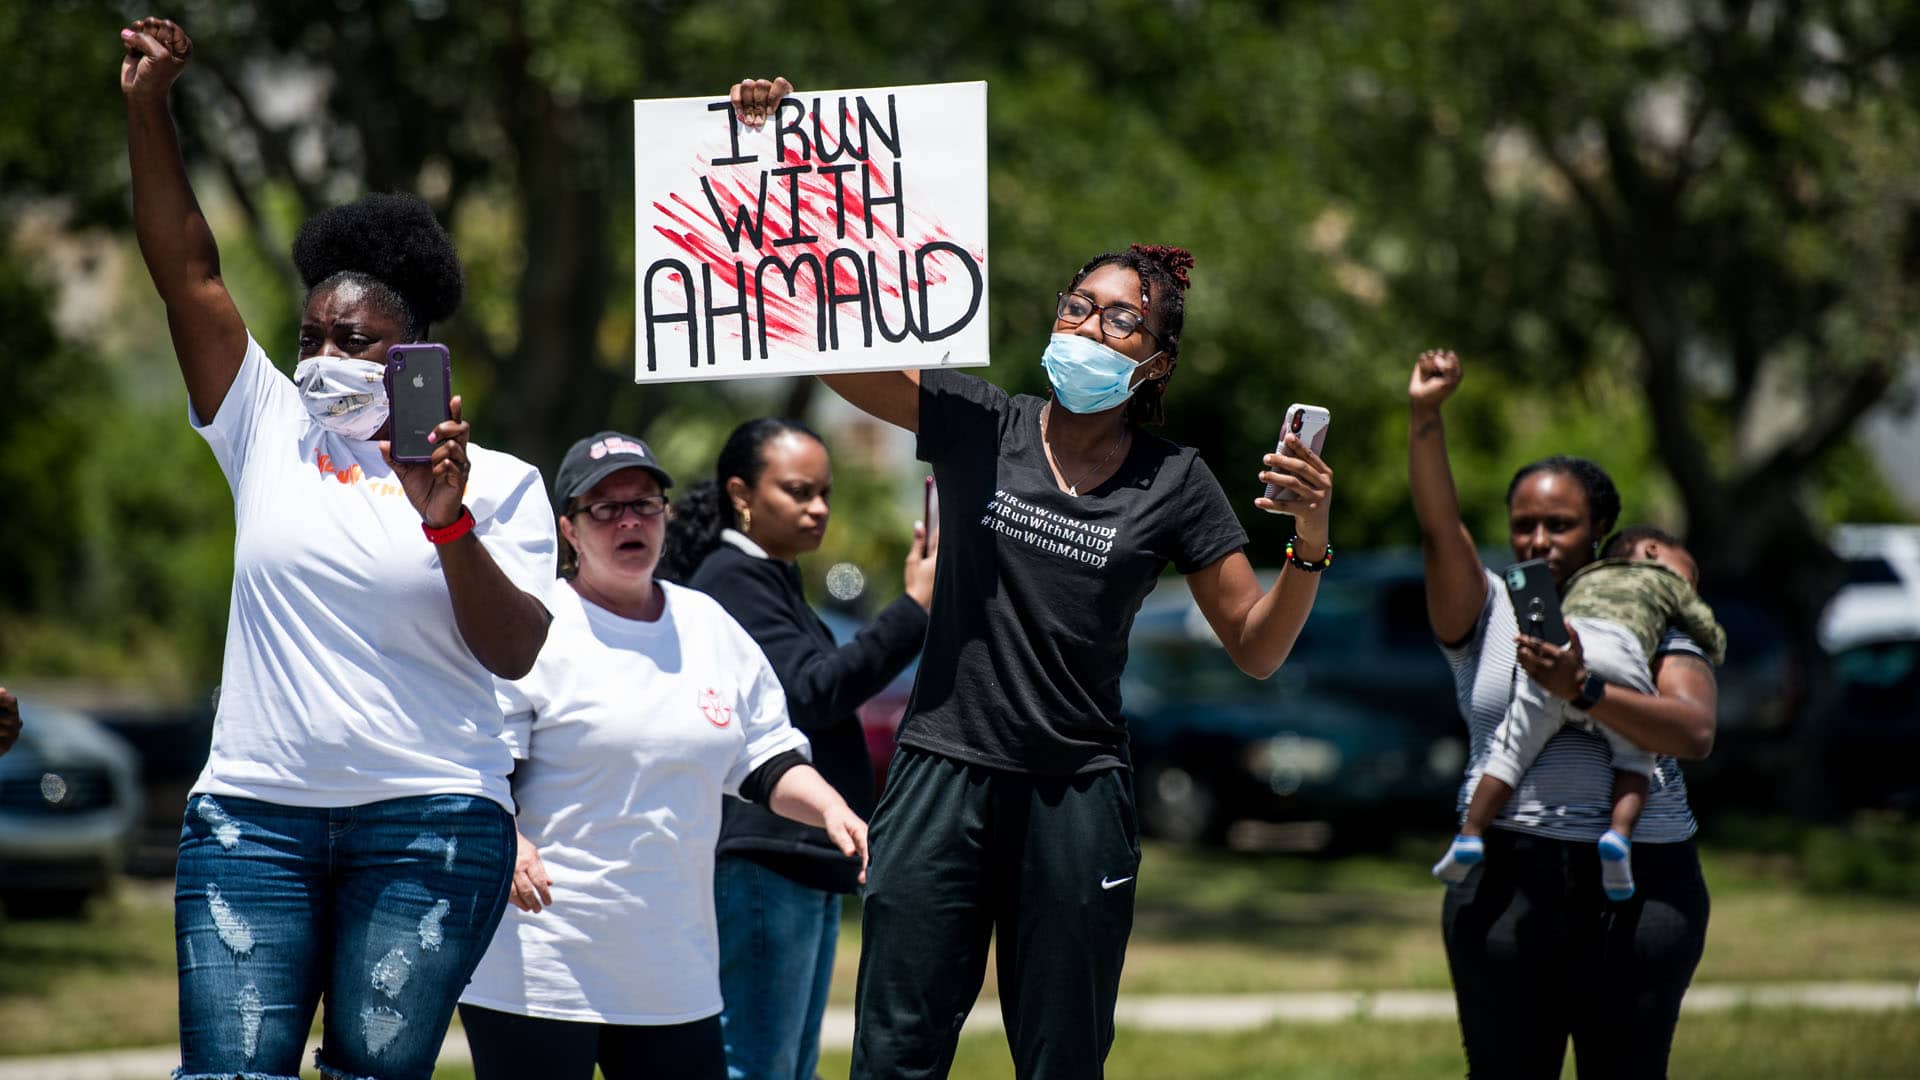 Demonstrators raise their fists at a parade of passing motorcyclists riding in honor of Ahmaud Arbery at Sidney Lanier Park on May 9, 2020 in Brunswick, Georgia.